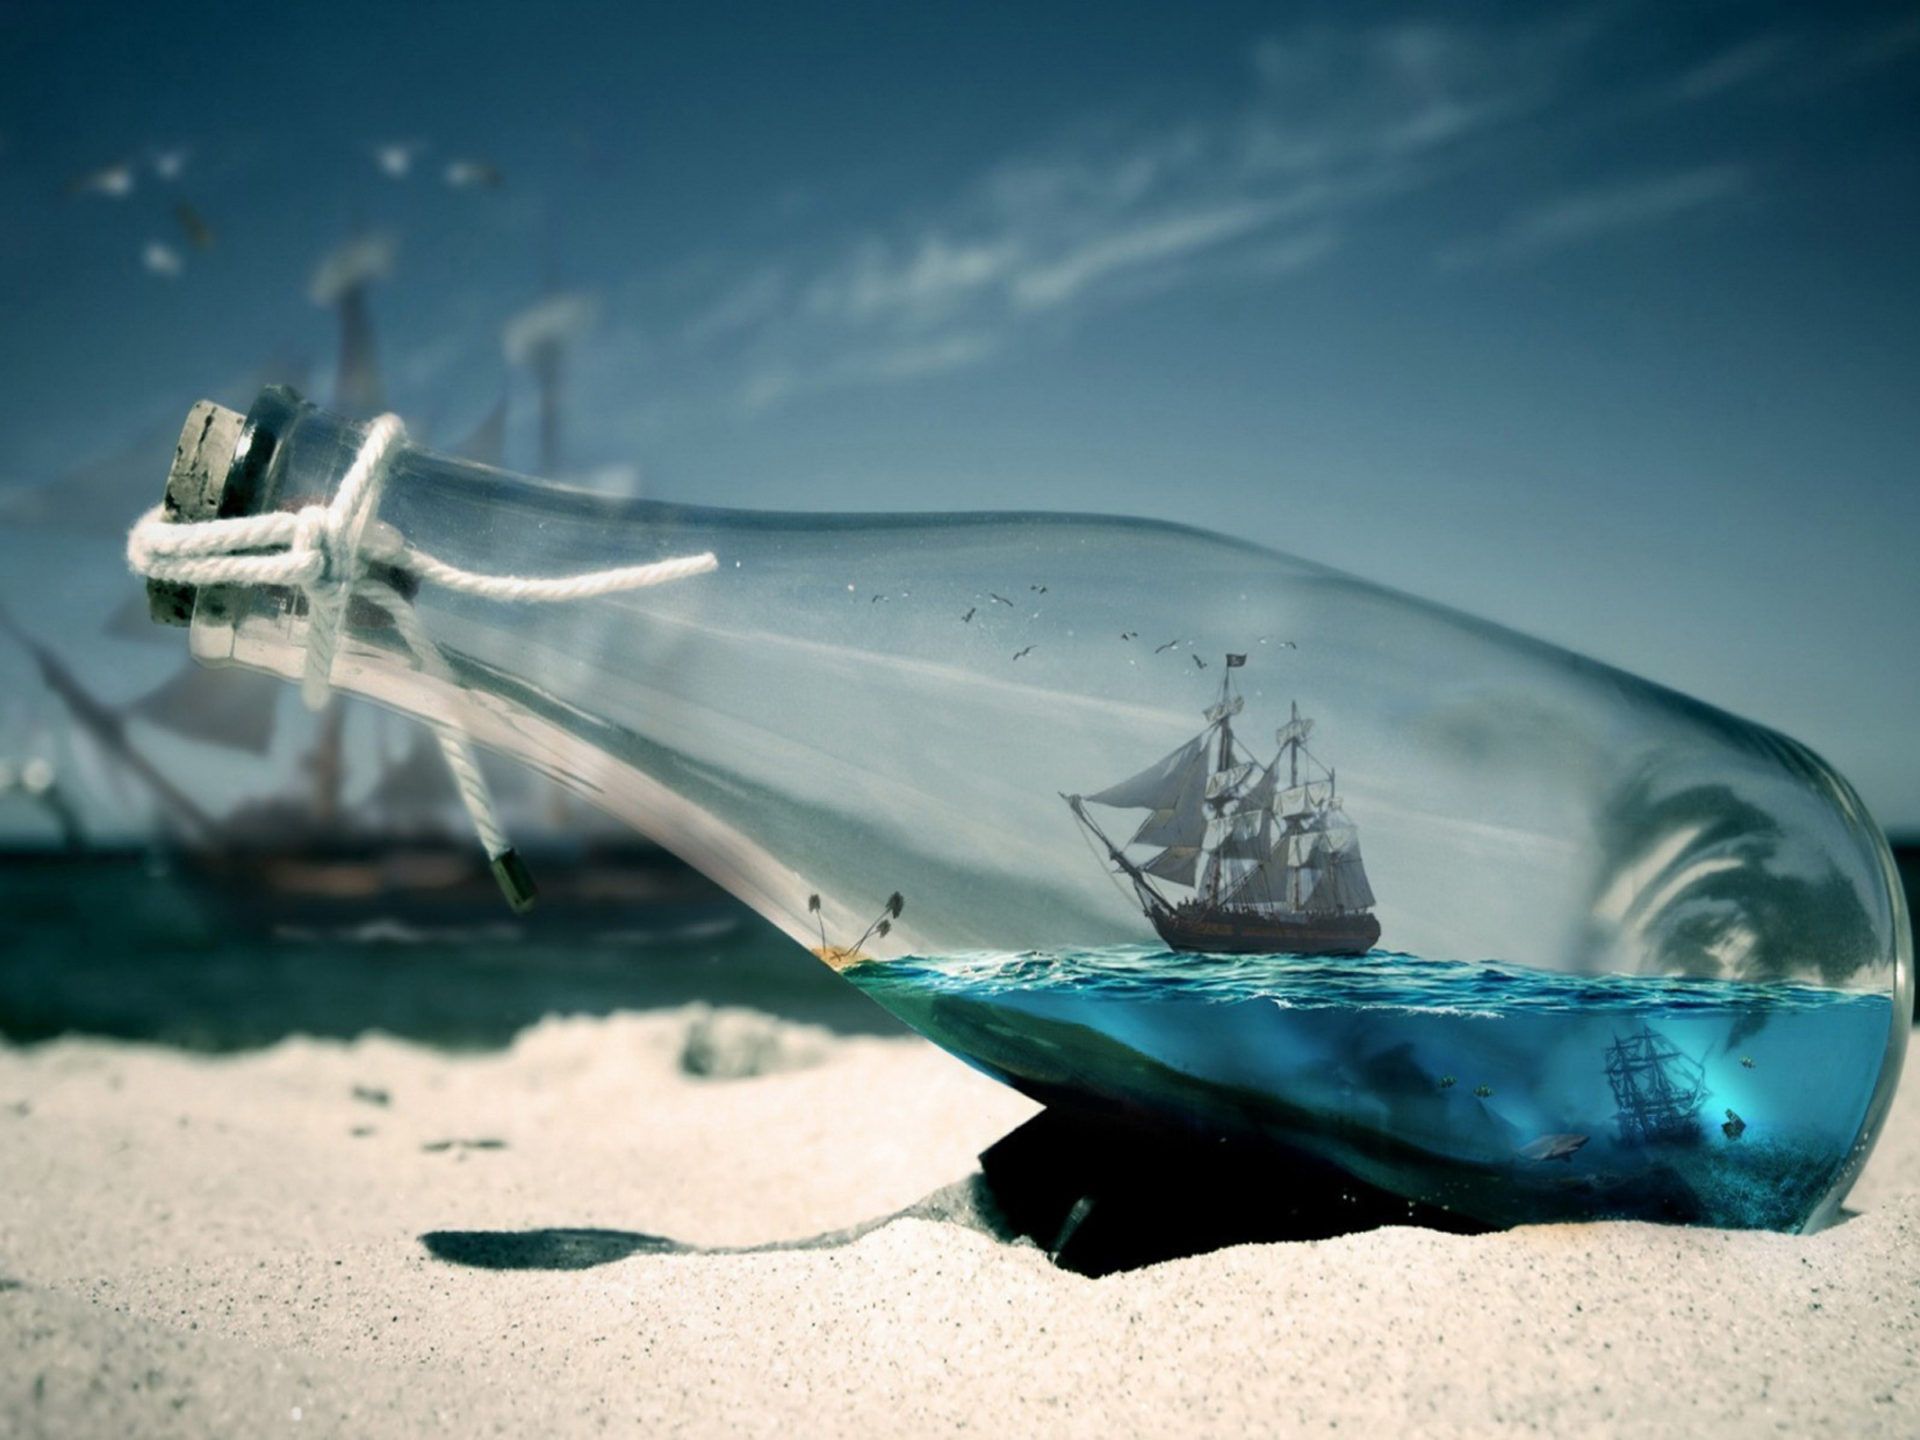 Ship in a bottle - Pirate